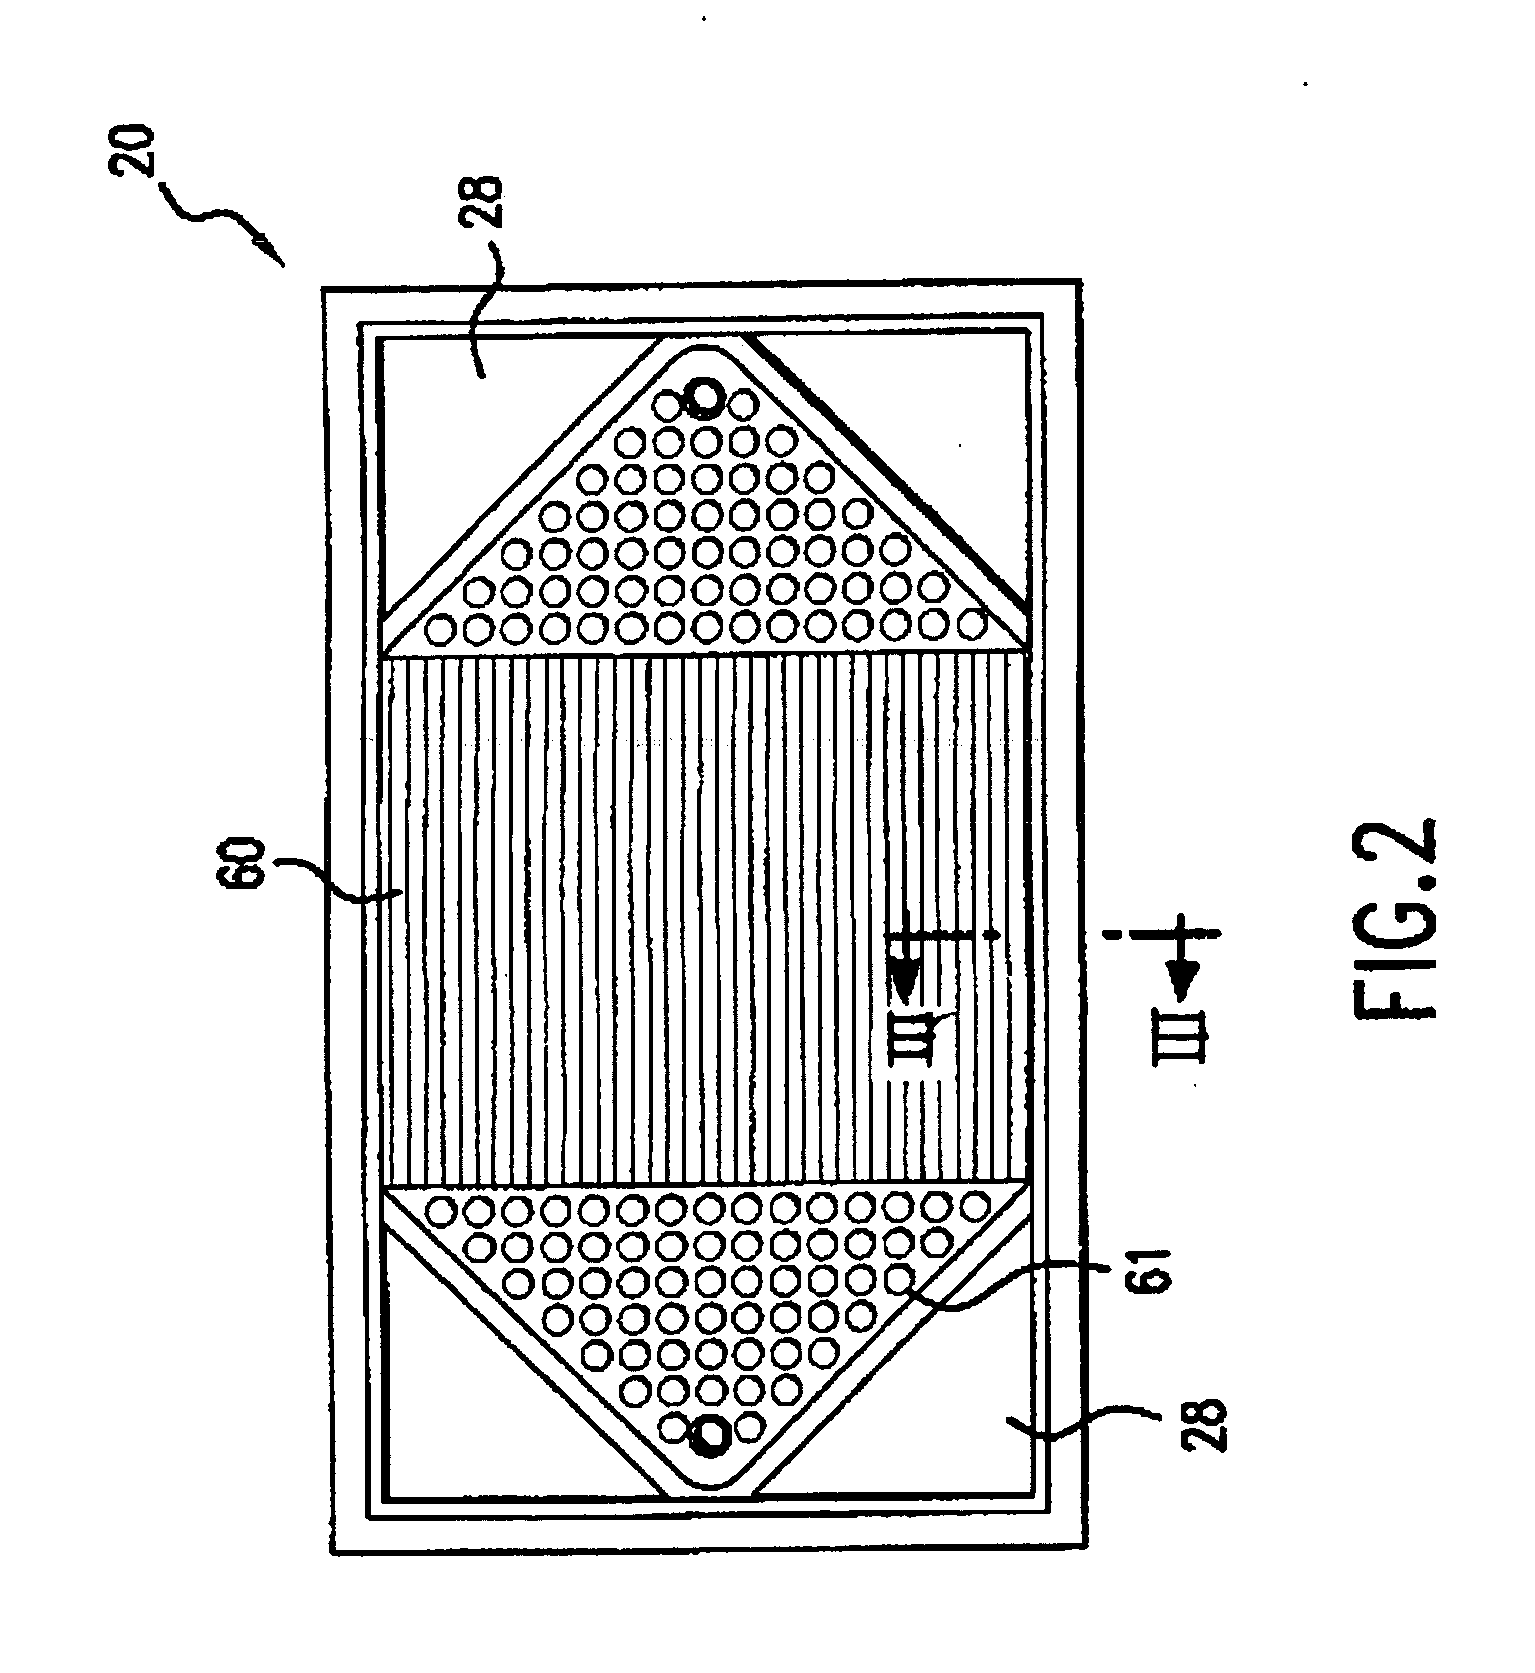 Fuel cell bipolar separator plate